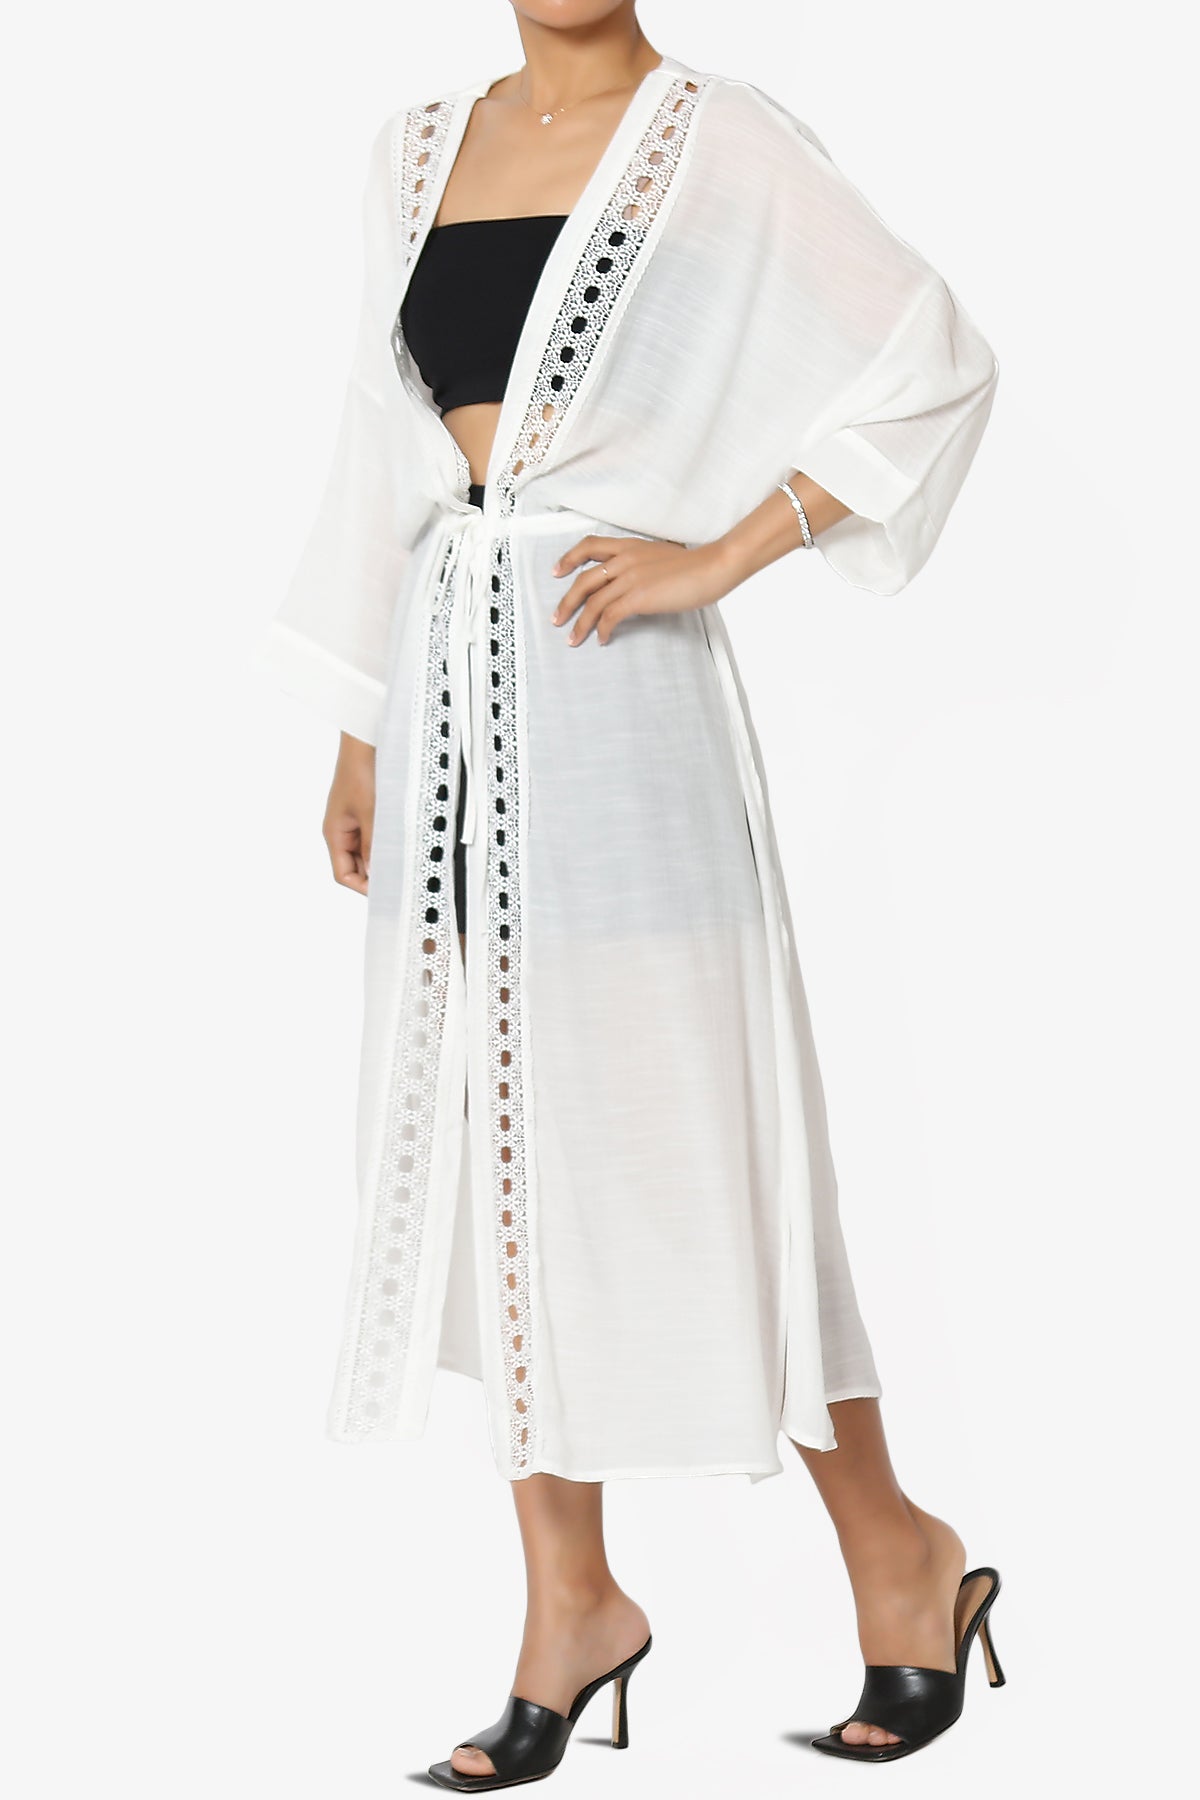 Load image into Gallery viewer, Sunlace Lace Trim High Slit Caftan OFF%20WHITE_3
